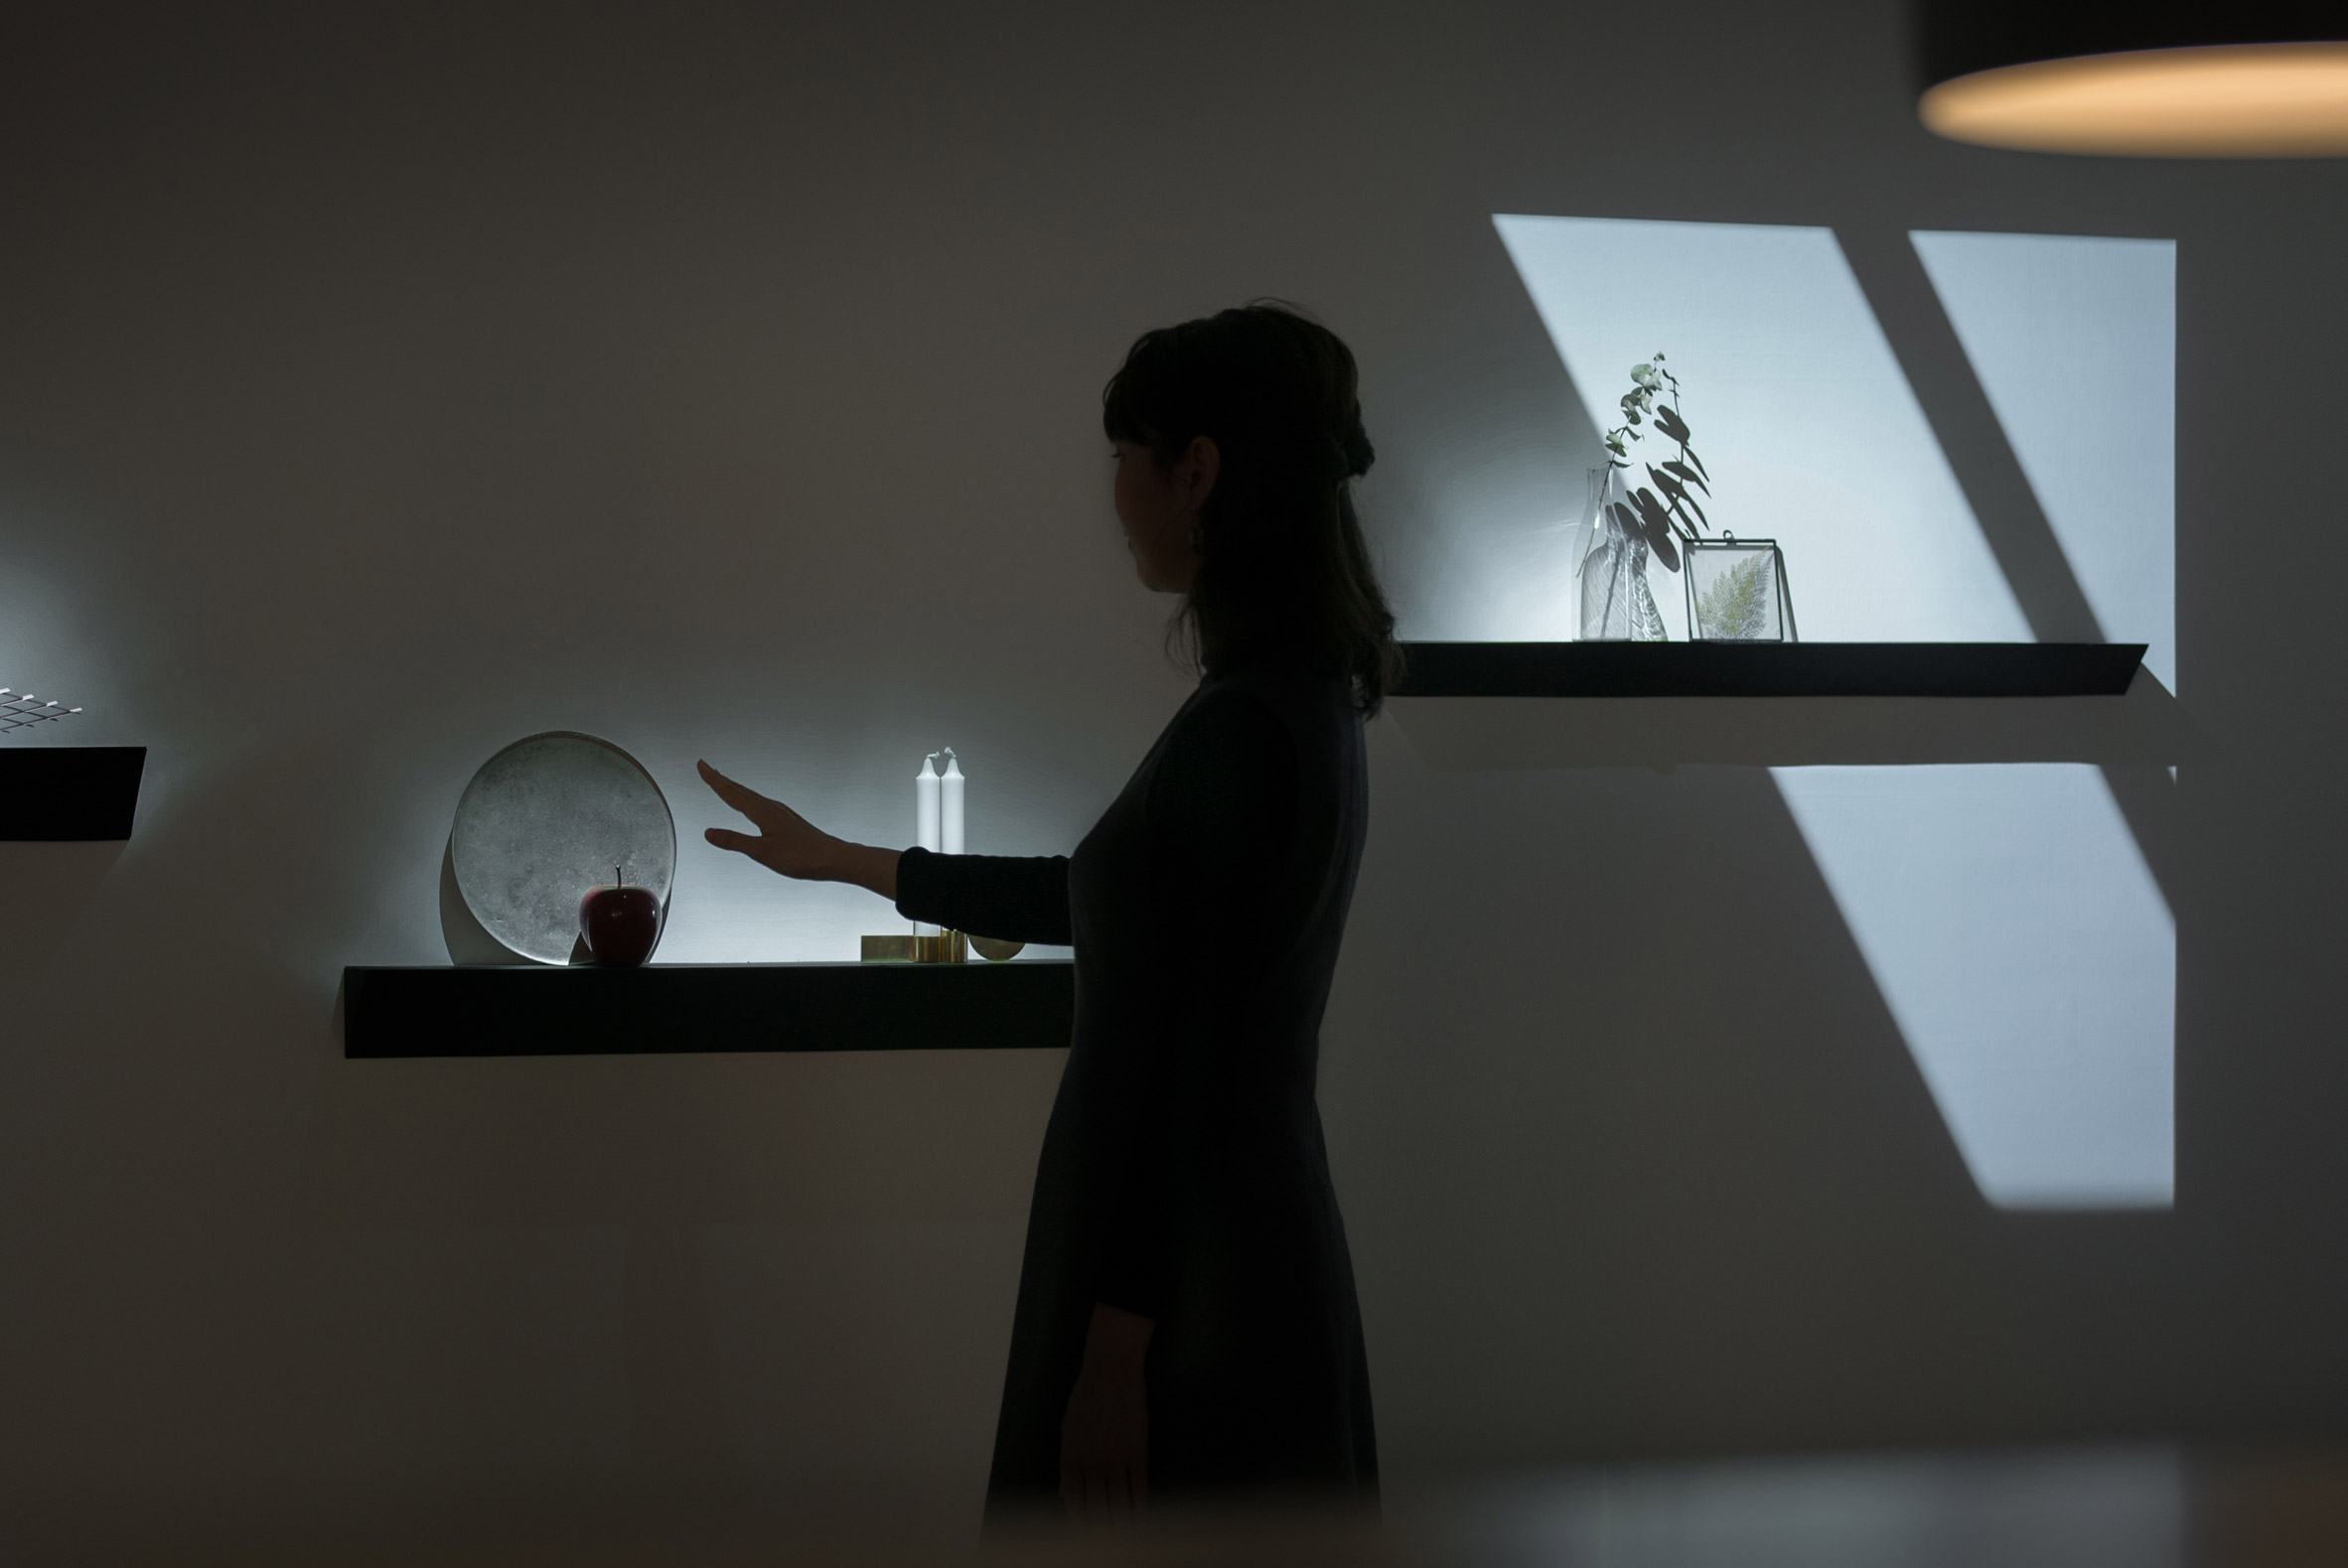 Sony explores future of sensor technology in the home with Hidden Senses exhibition